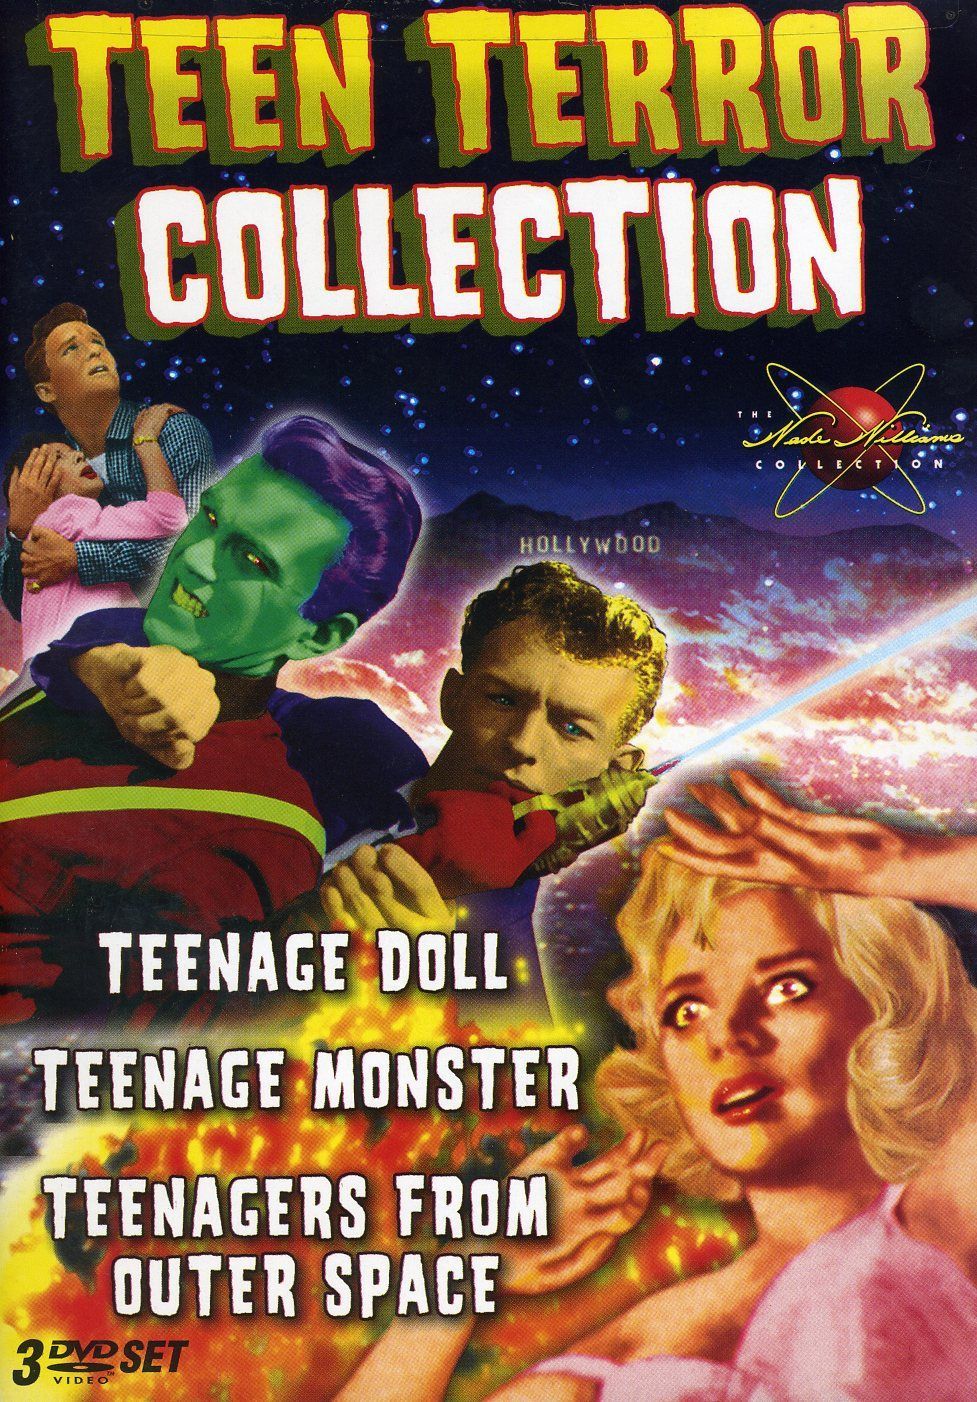 Picture on teengraphic movies